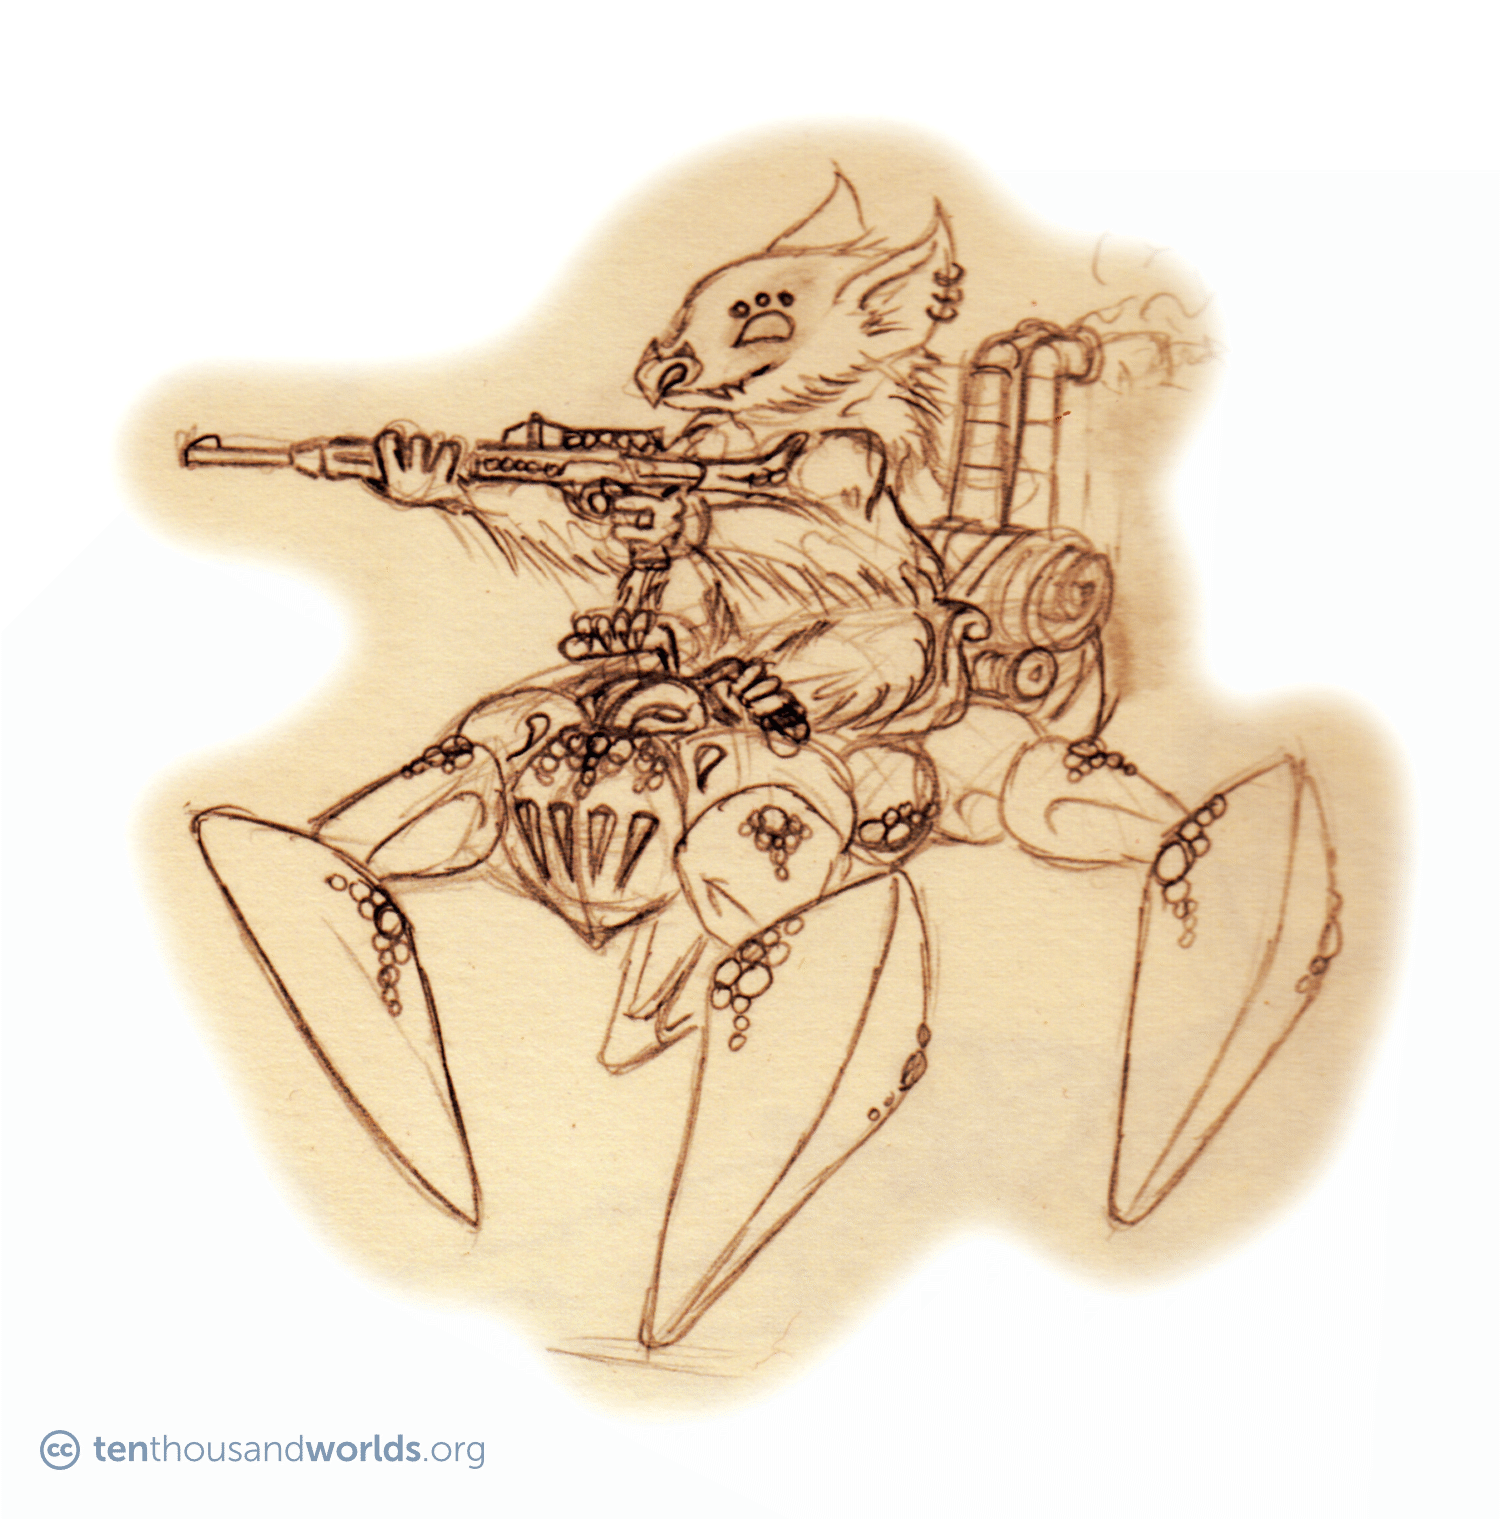 A pencil sketch of a creature like a long-furred koala with a bat-like face rides a four-legged insect-shaped machine, holding a rifle in its fore-paws and steering with its hind-paws.